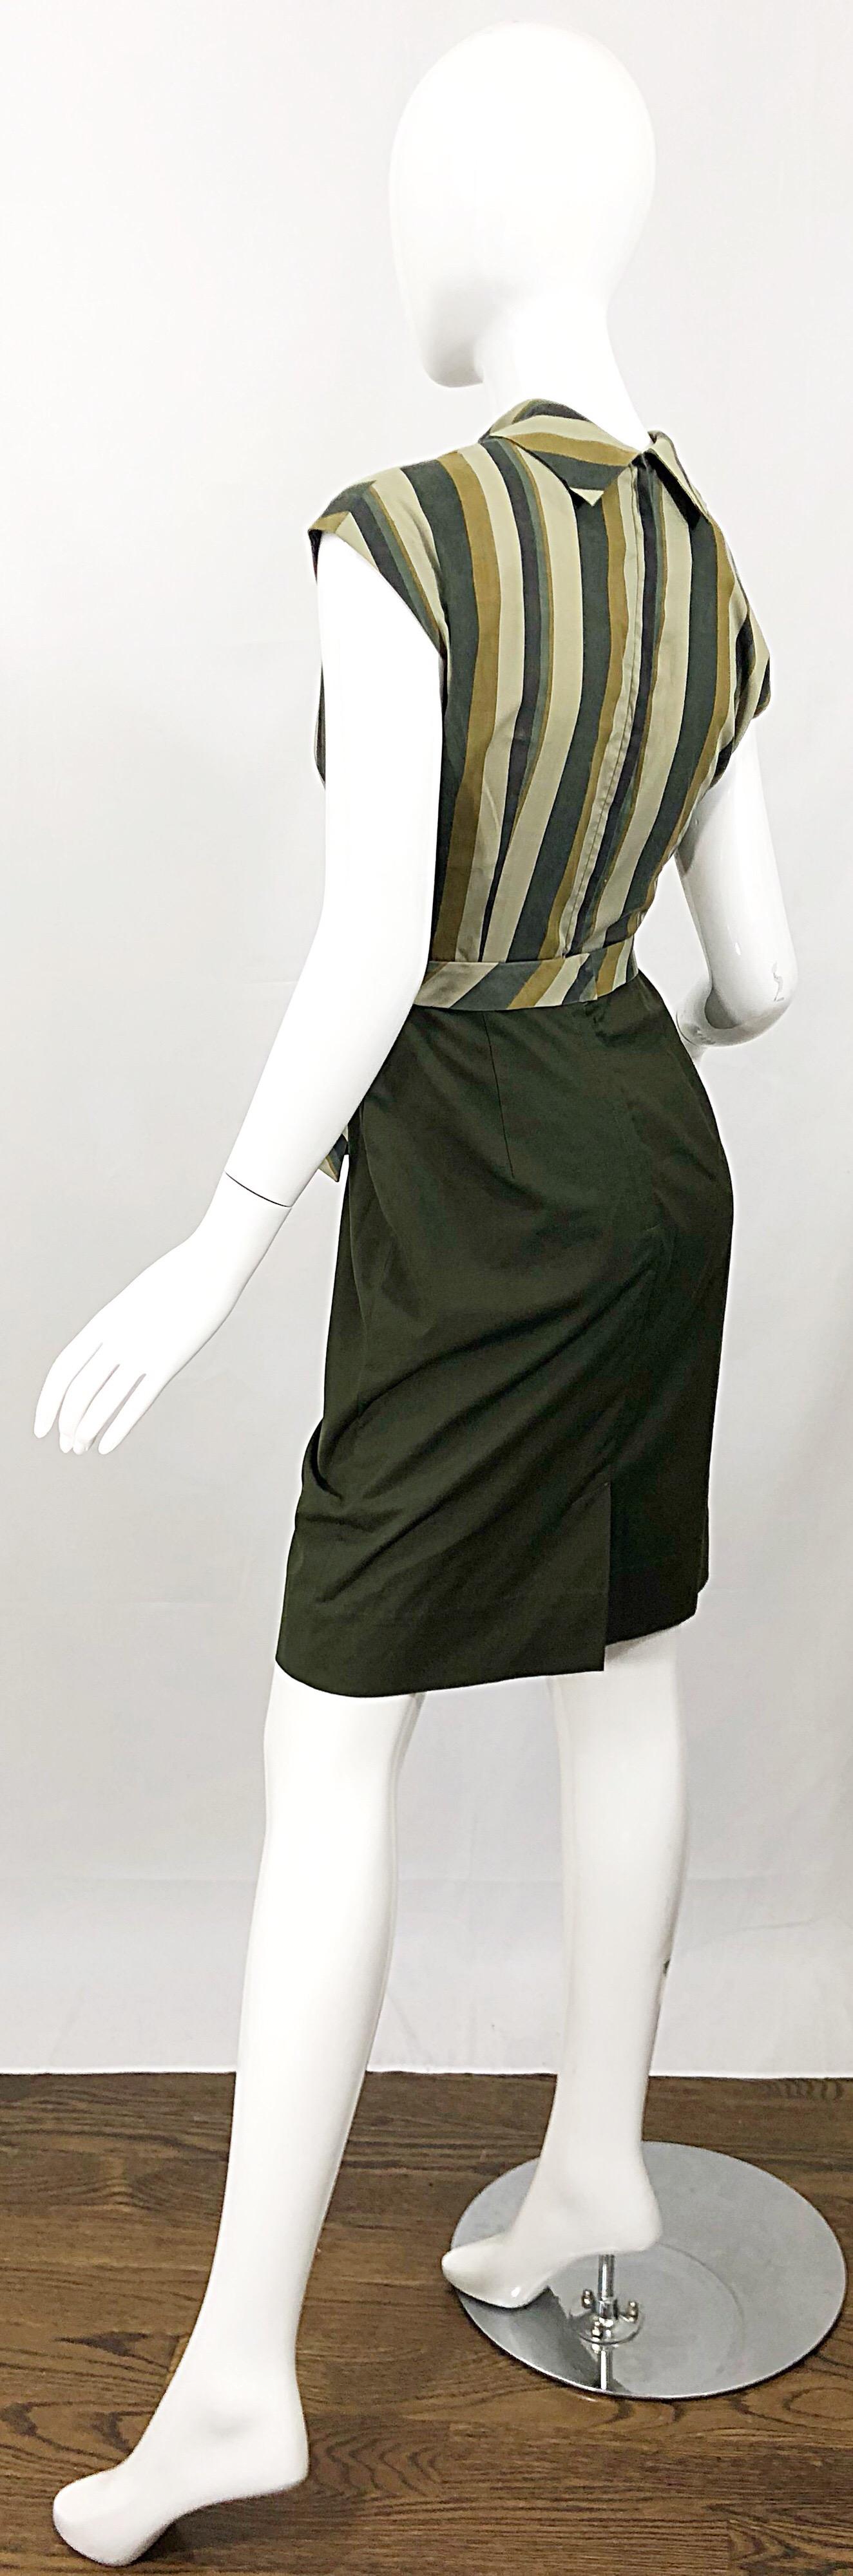 1960s Chic Chartreuse Olive Green Cotton Striped Cap Sleeve Vintage 60s Dress For Sale 4